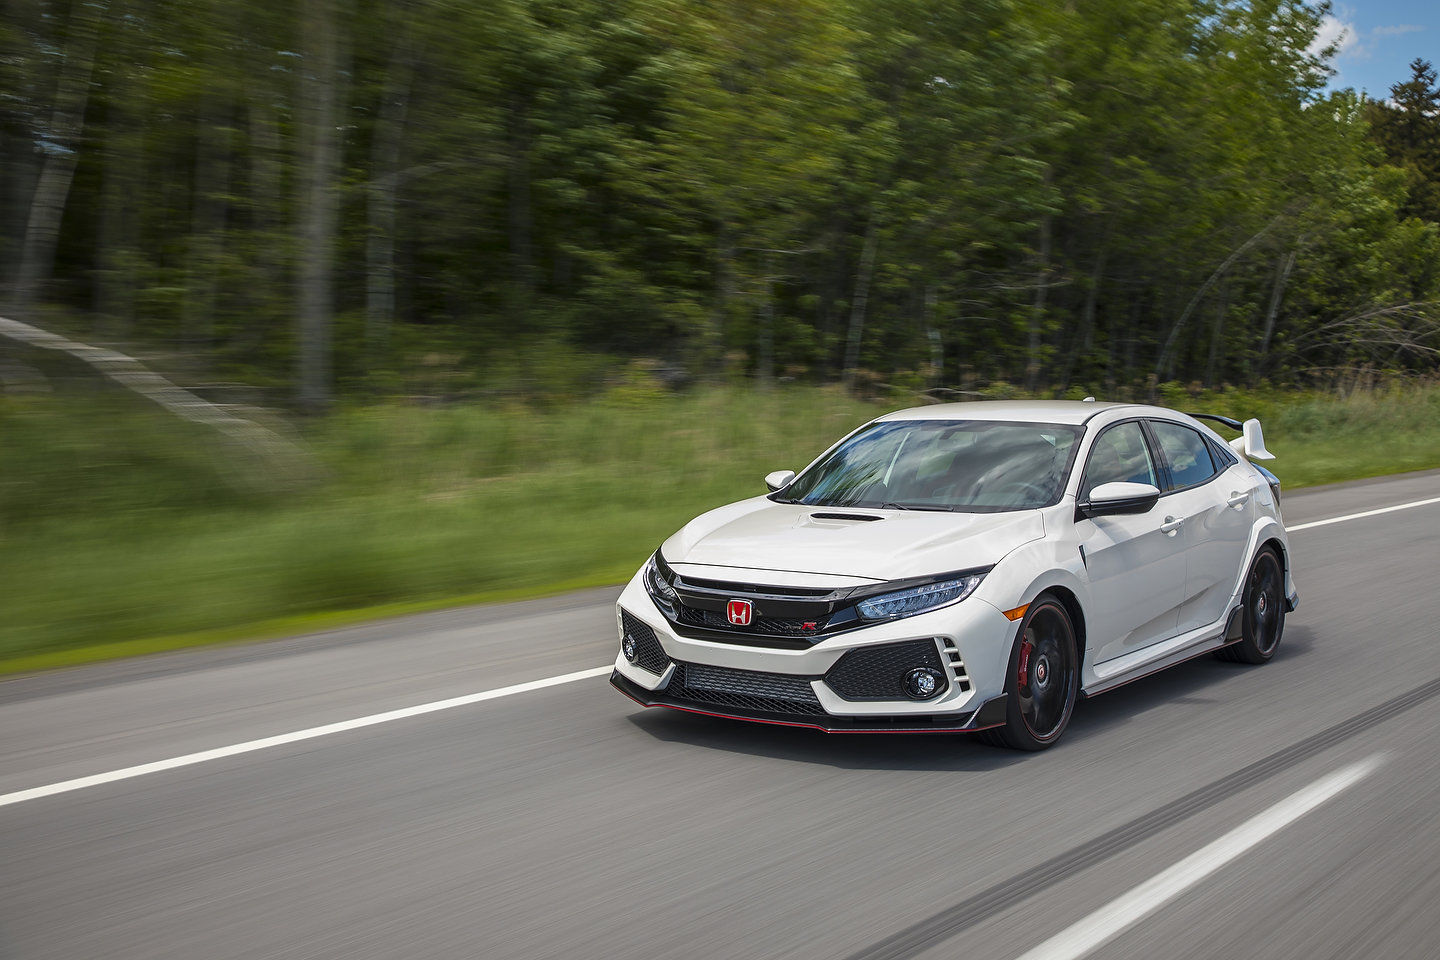 Compact performance cars icons, the Honda Civic Si and Civic Type R are better than ever